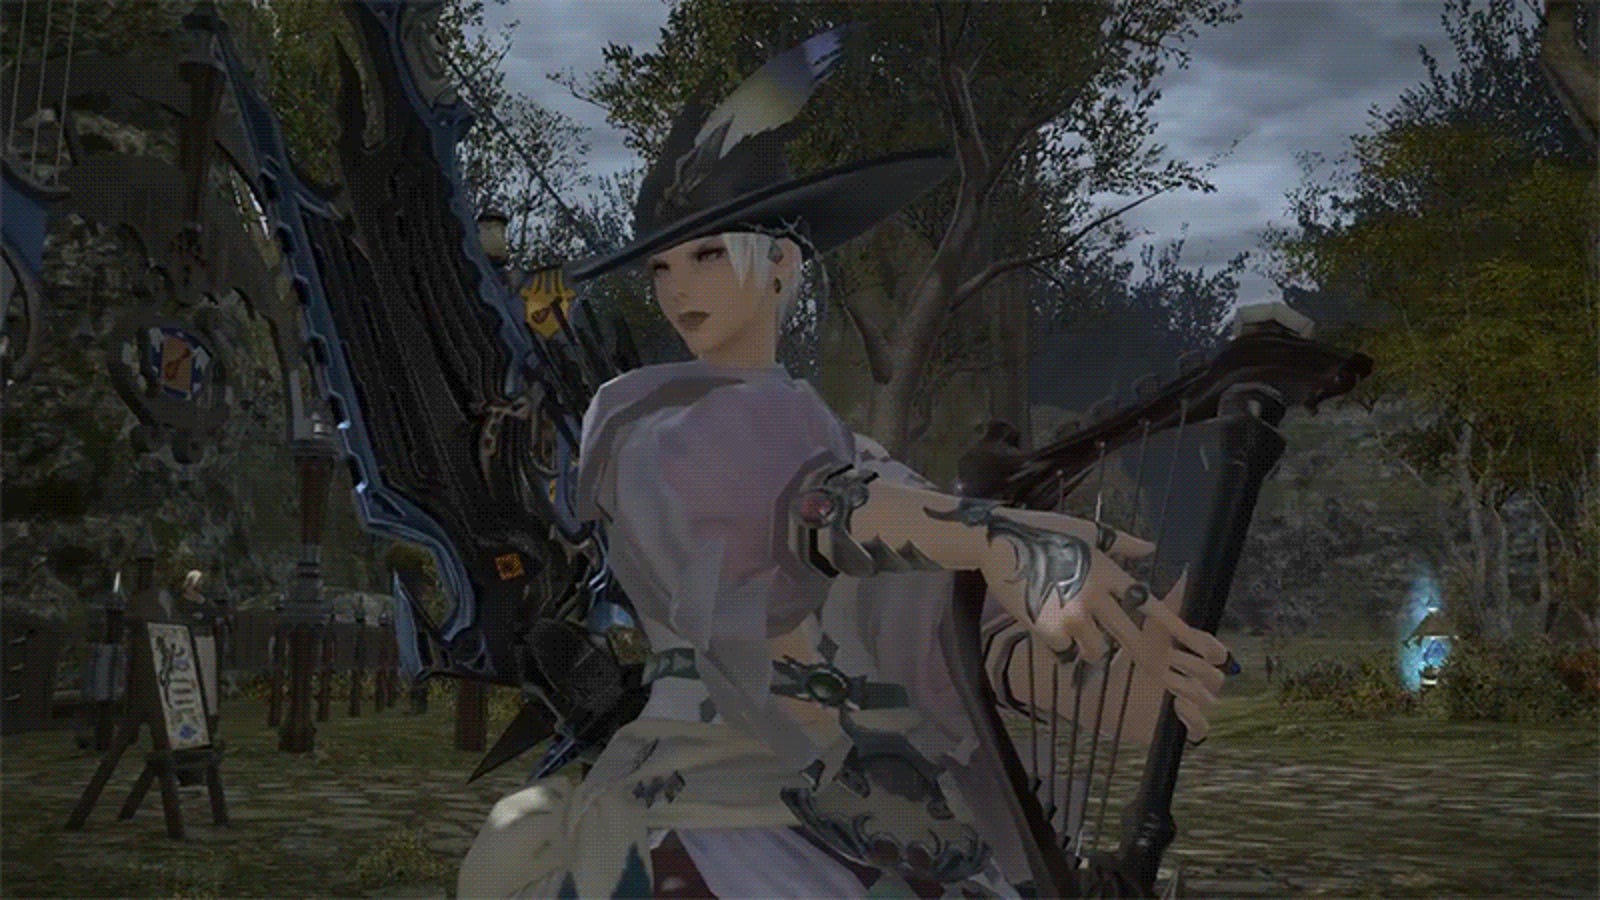 For Better Or Worse, Final Fantasy XIV Bards Can Play Music Now - WP Discus...